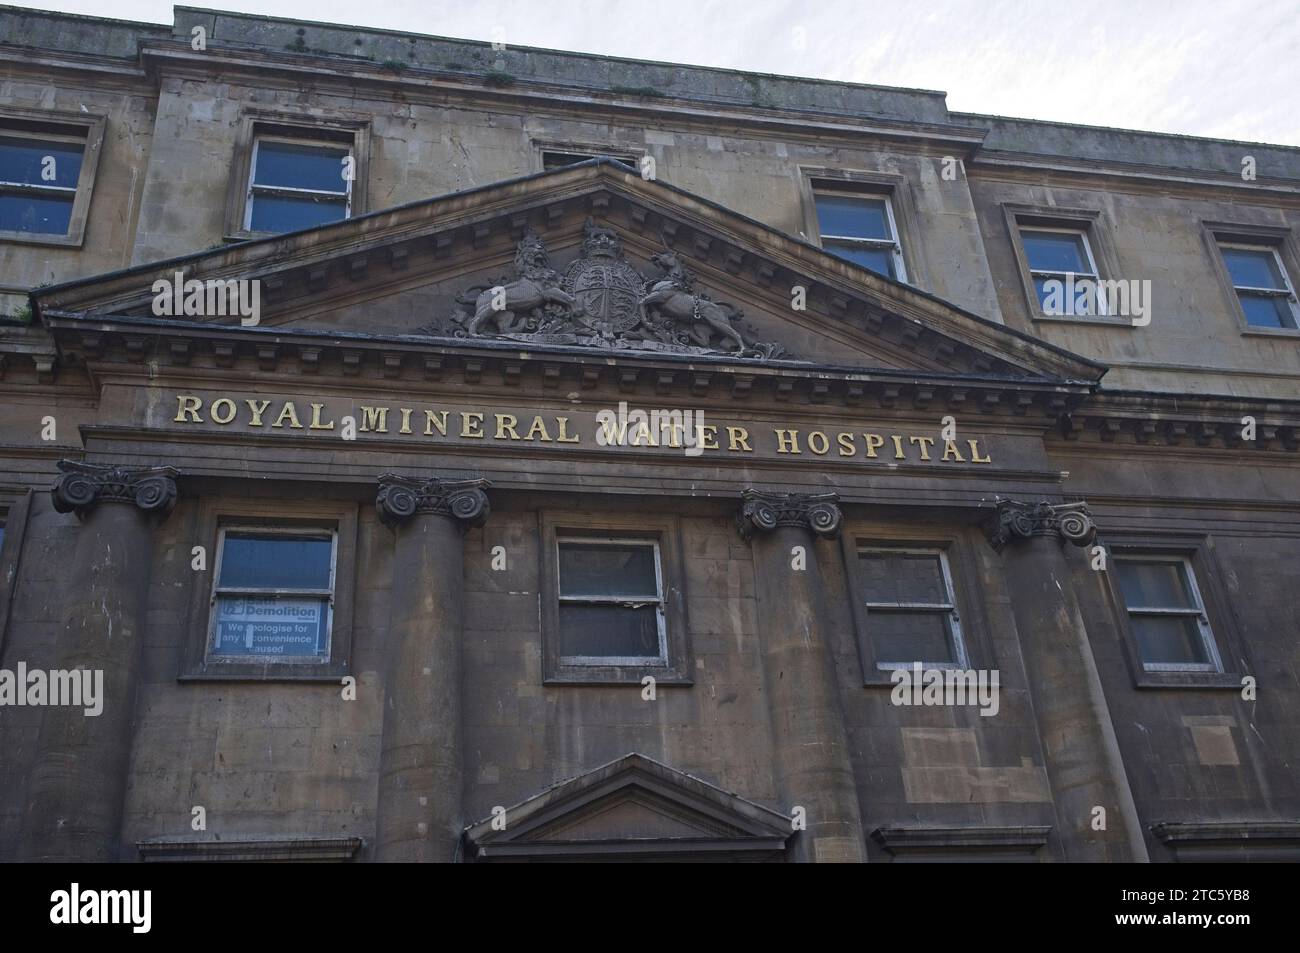 Royal Mineral Water Hospital in Bath. Deserted and neglected ready for redevelopment. Altterly used as Royal National Hospital for Rheumatic Diseases Stock Photo